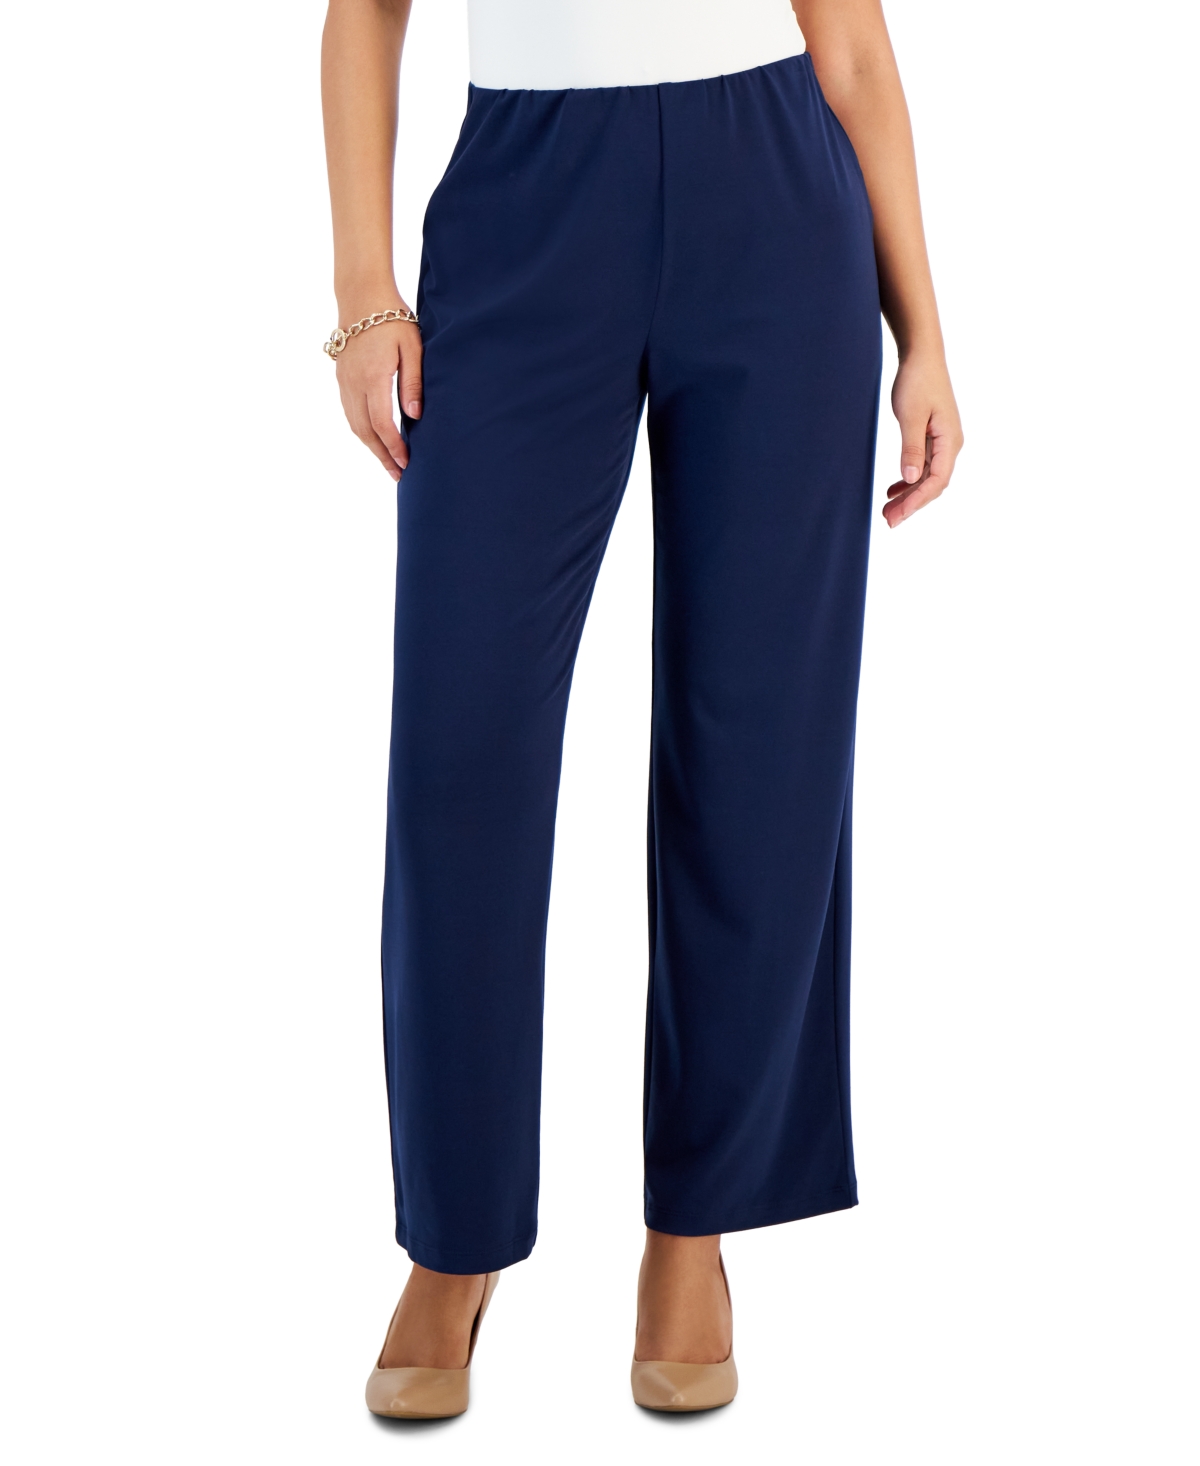 Jm Collection Petites Knit Pull-on Pants, Created For Macy's In Intrepid Blue